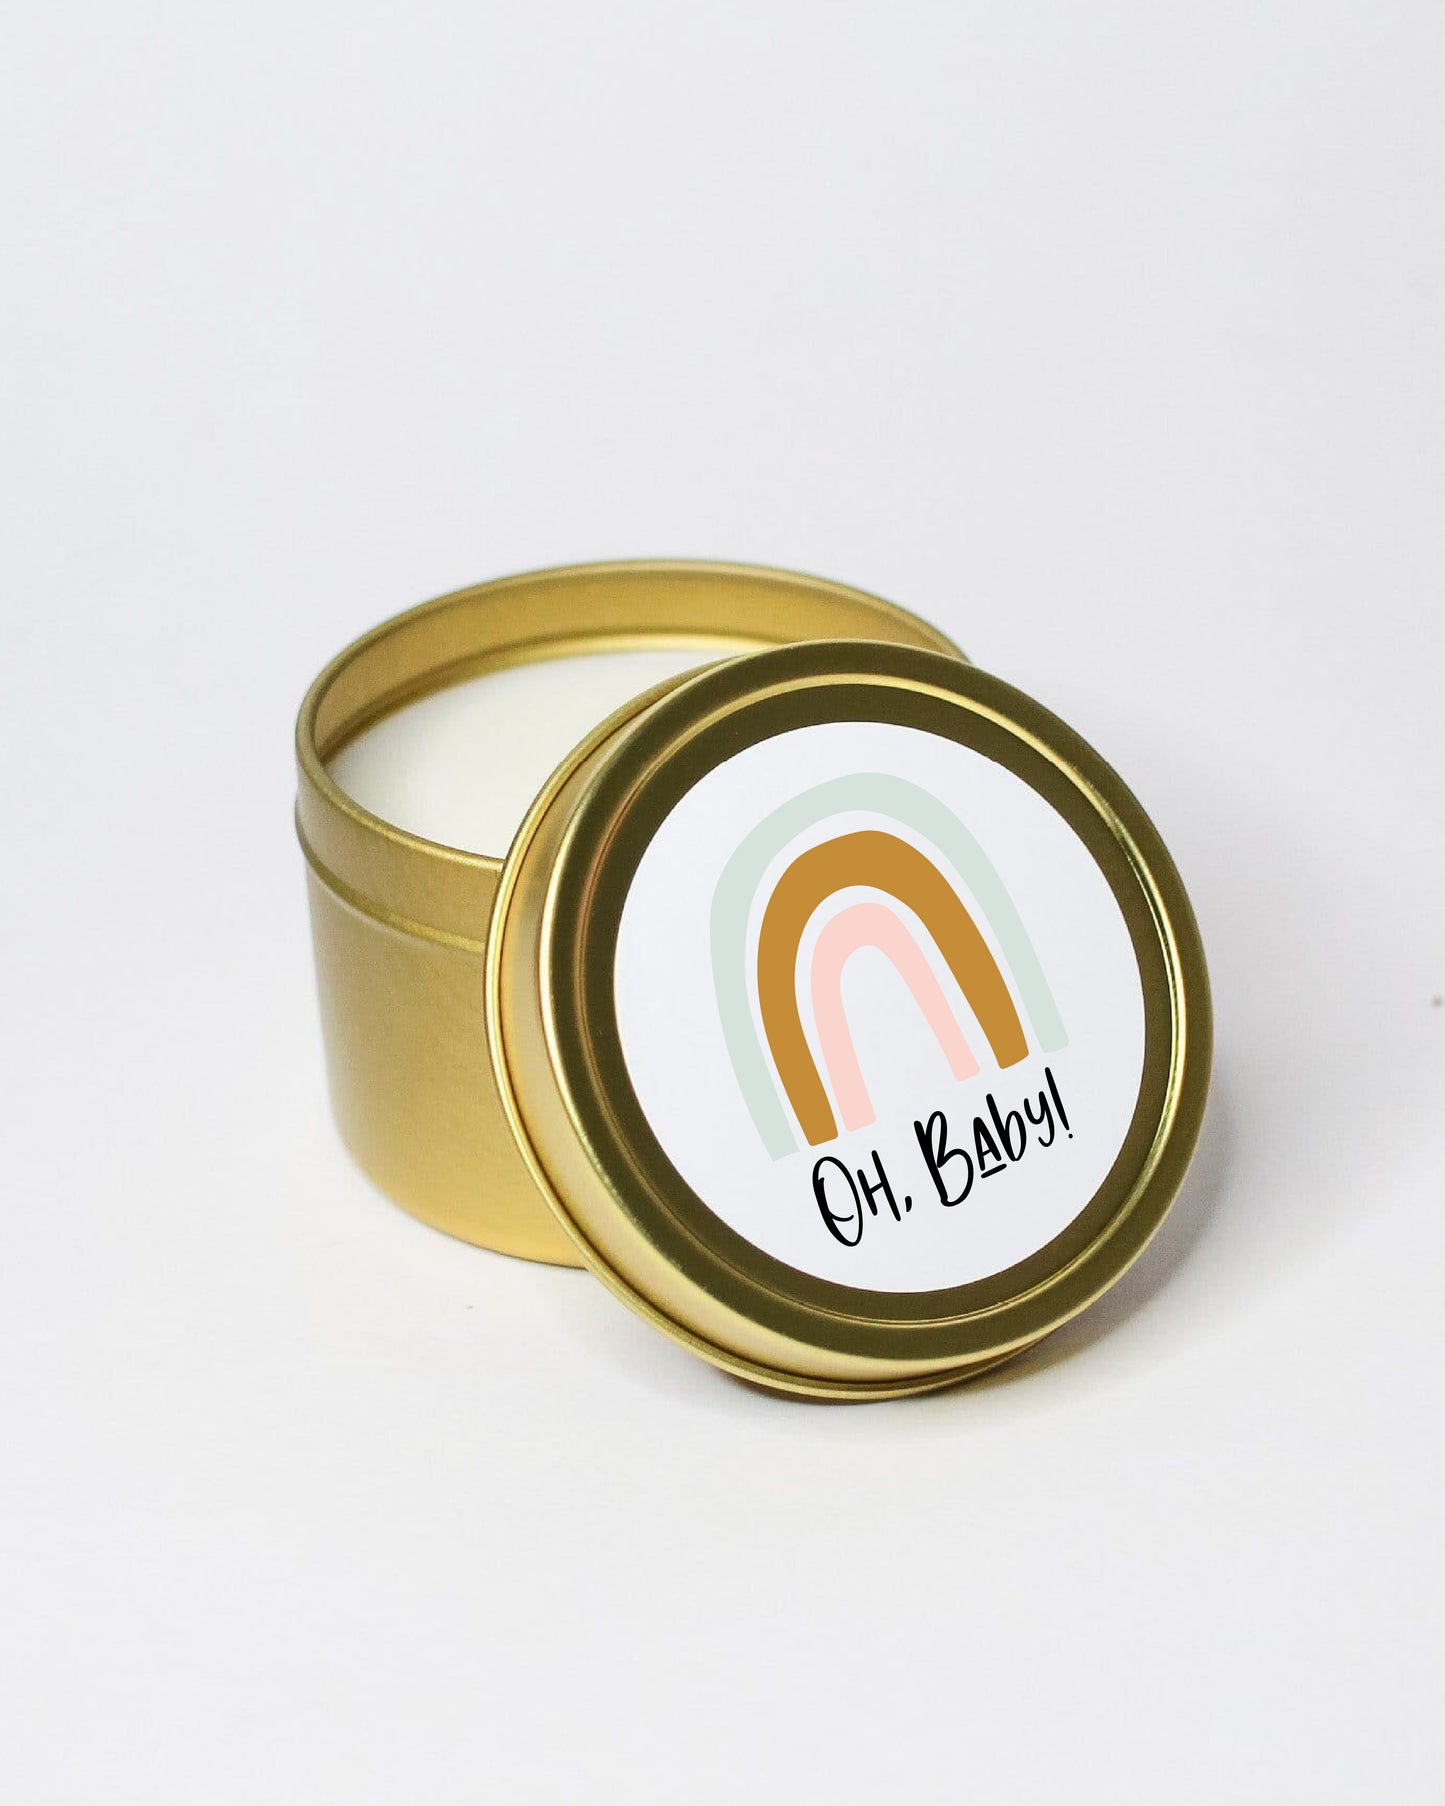 Oh, Baby! Rainbow | 010 | Personalized Candles | 4 oz